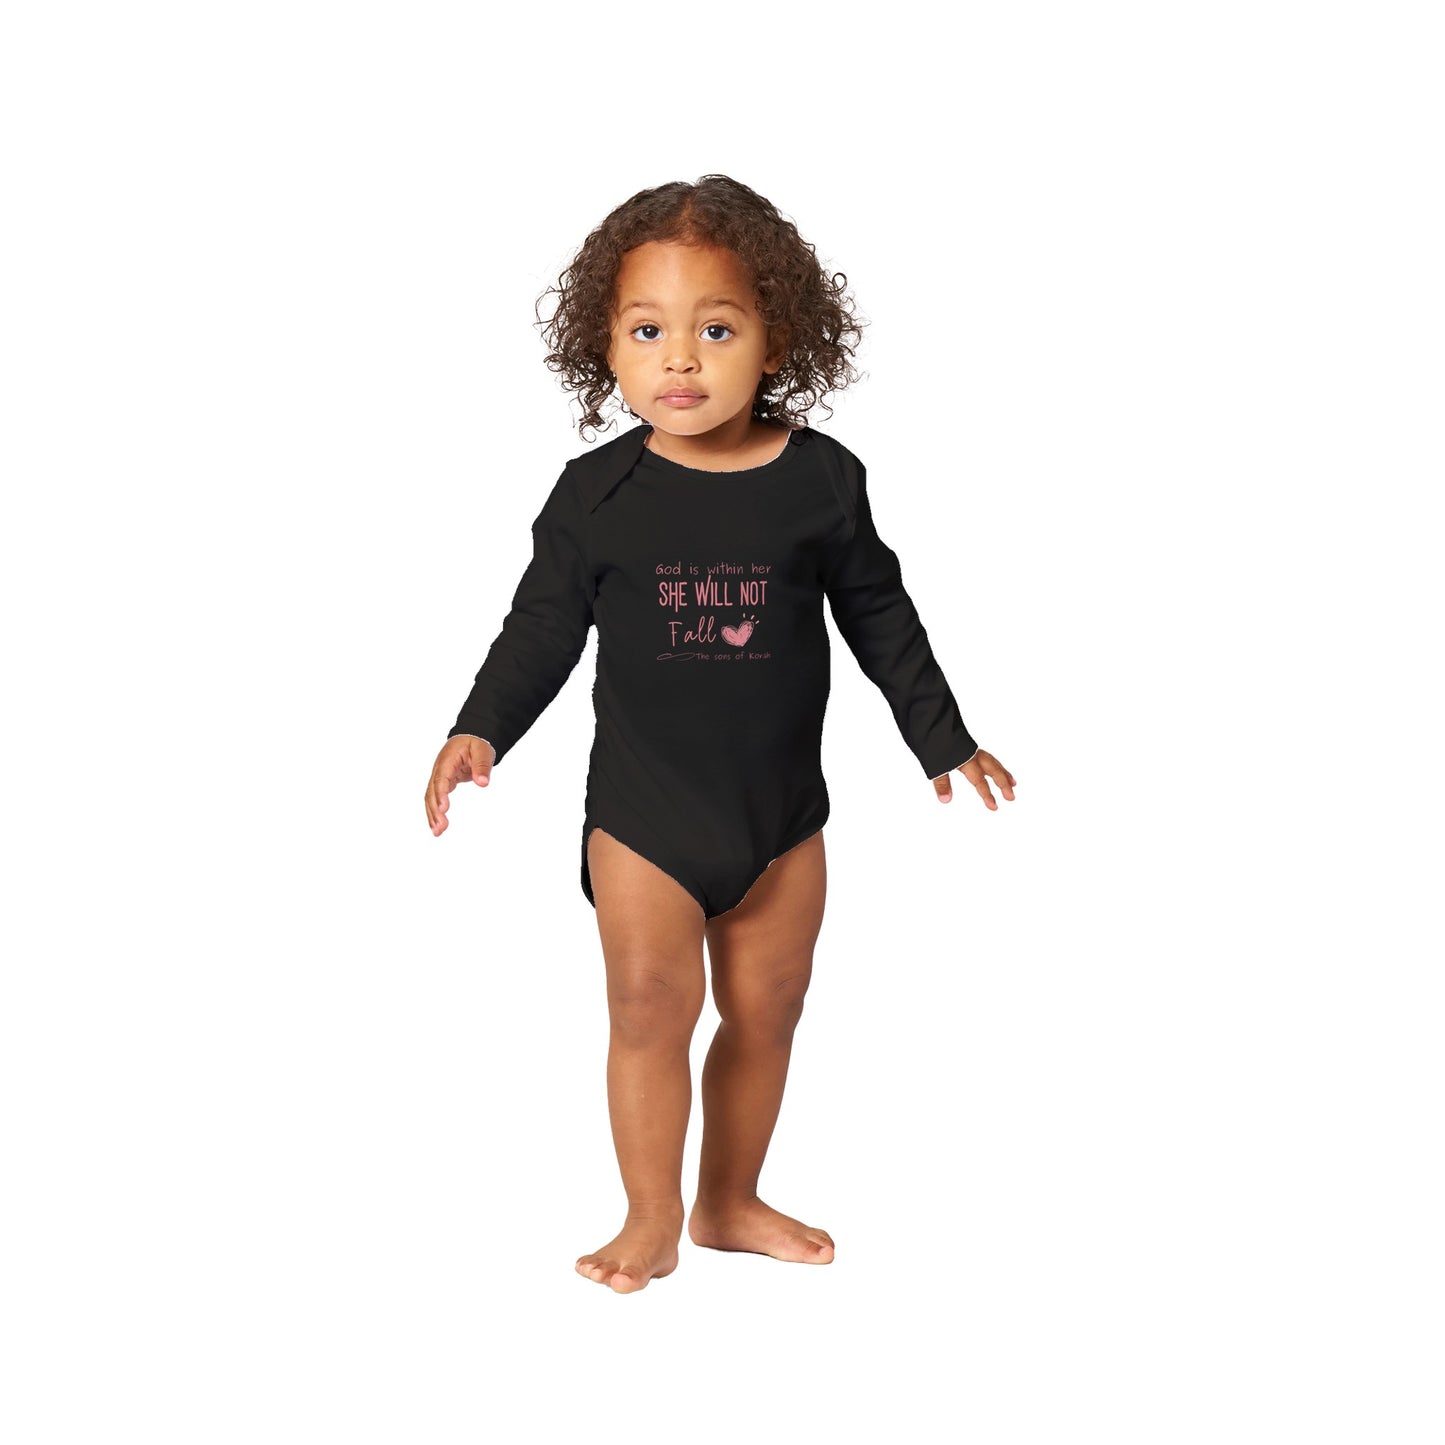 God is Within Her - Classic Baby Long Sleeve Bodysuit